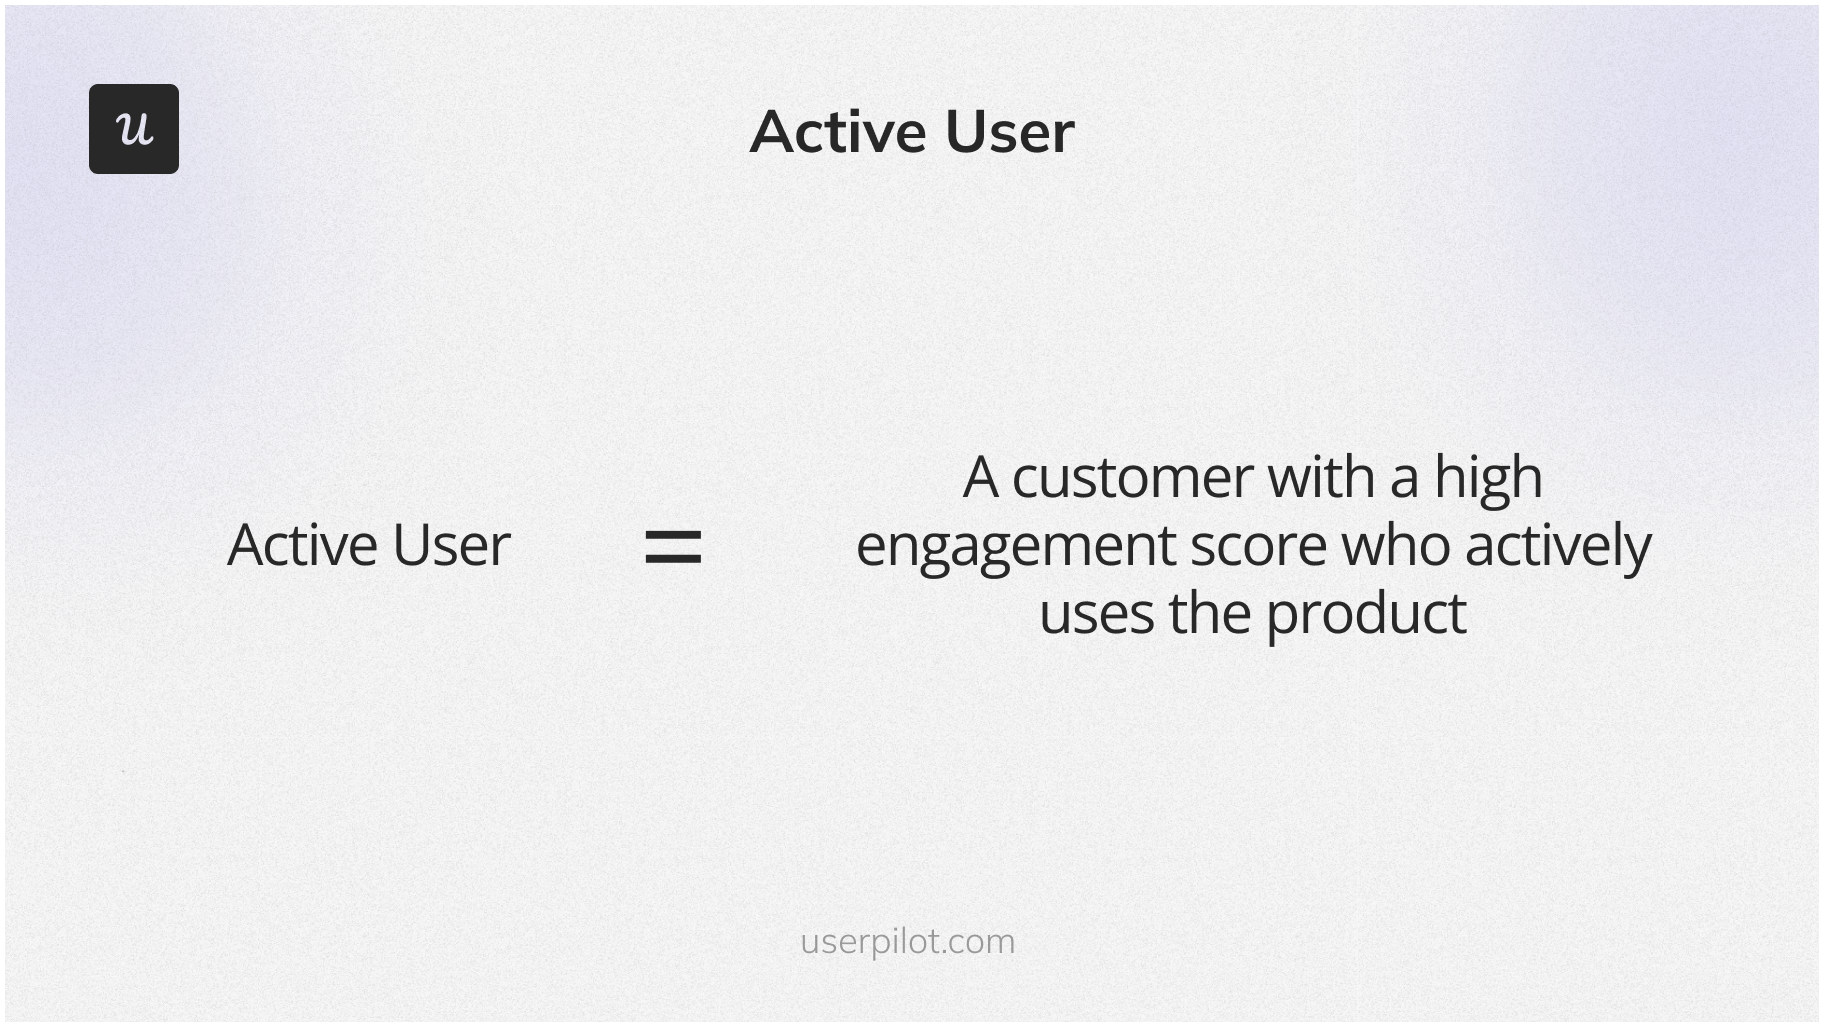 What is an active user?